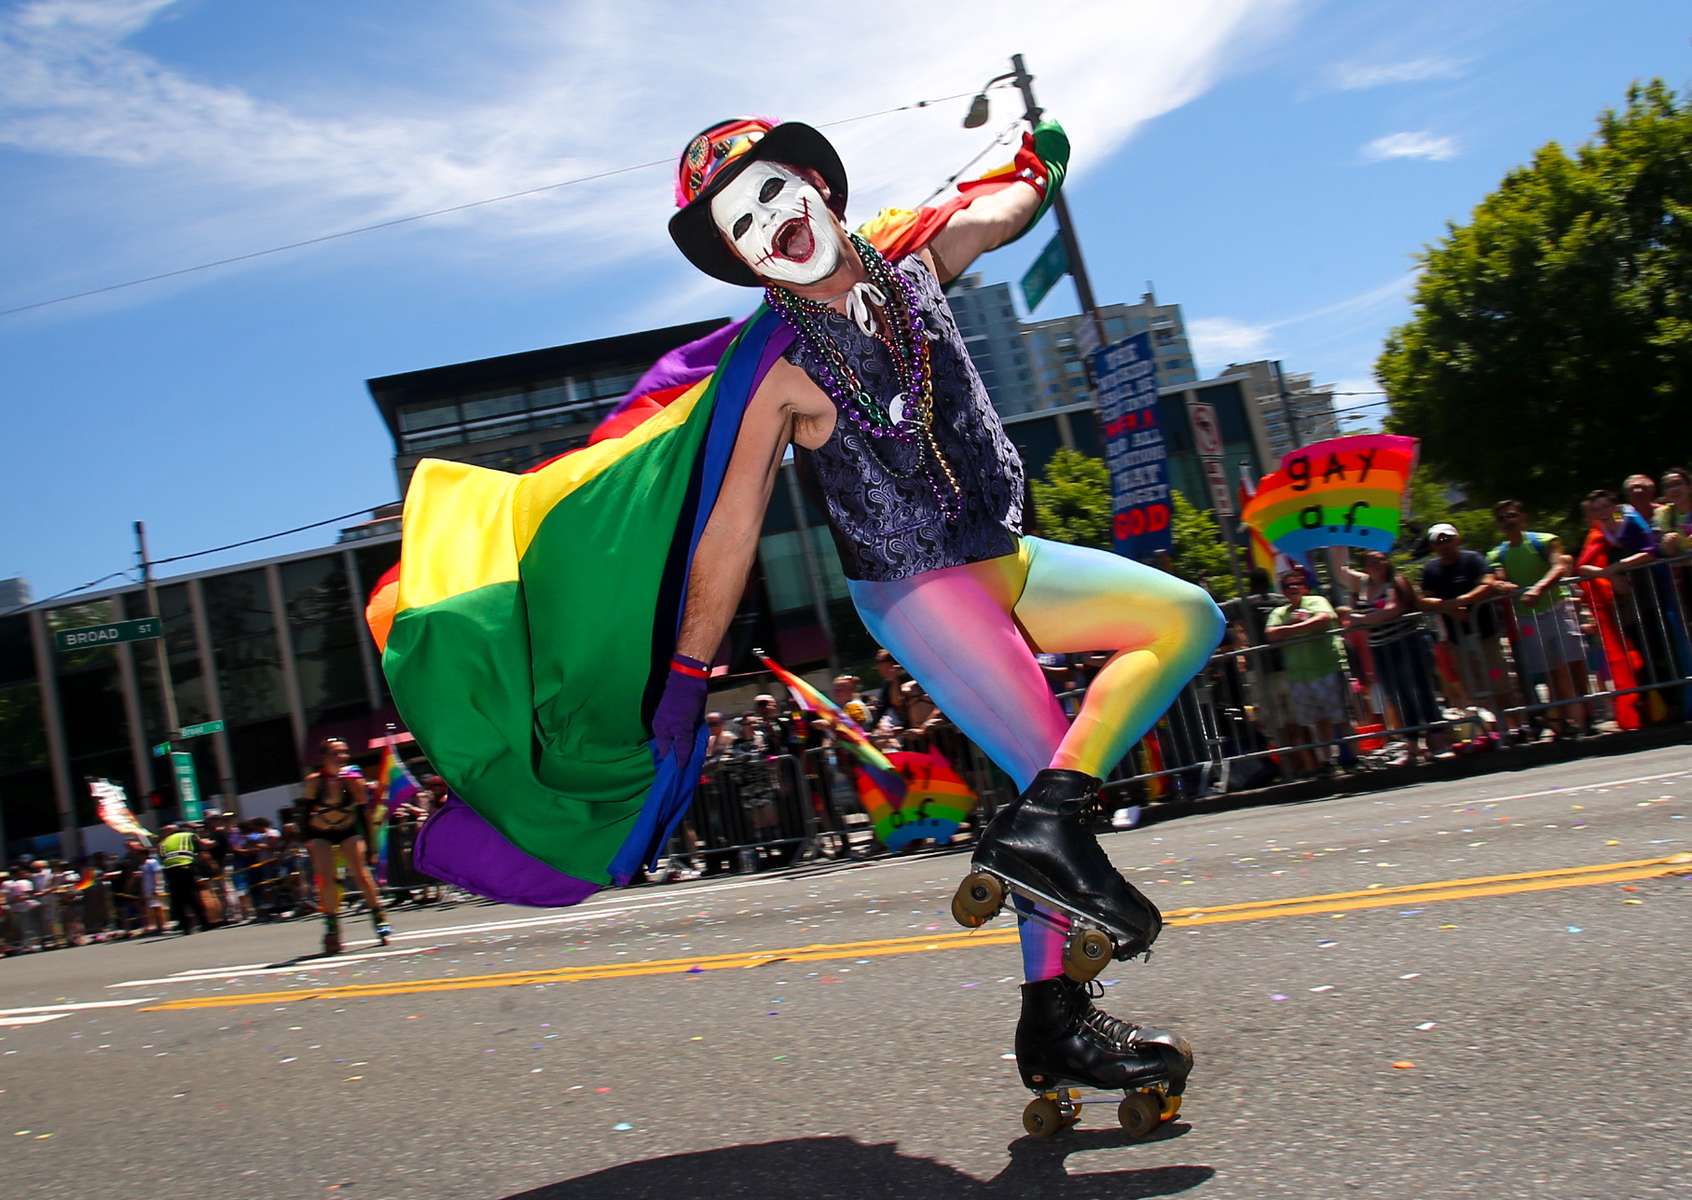 The 43rd annual Seattle Pride Parade in Seattle, WA on June 25, 2017. Festivities continued afterwards at Ozzie's bar which held specials sponsored by Hop Valley Brewing Co. (© Karen Ducey)